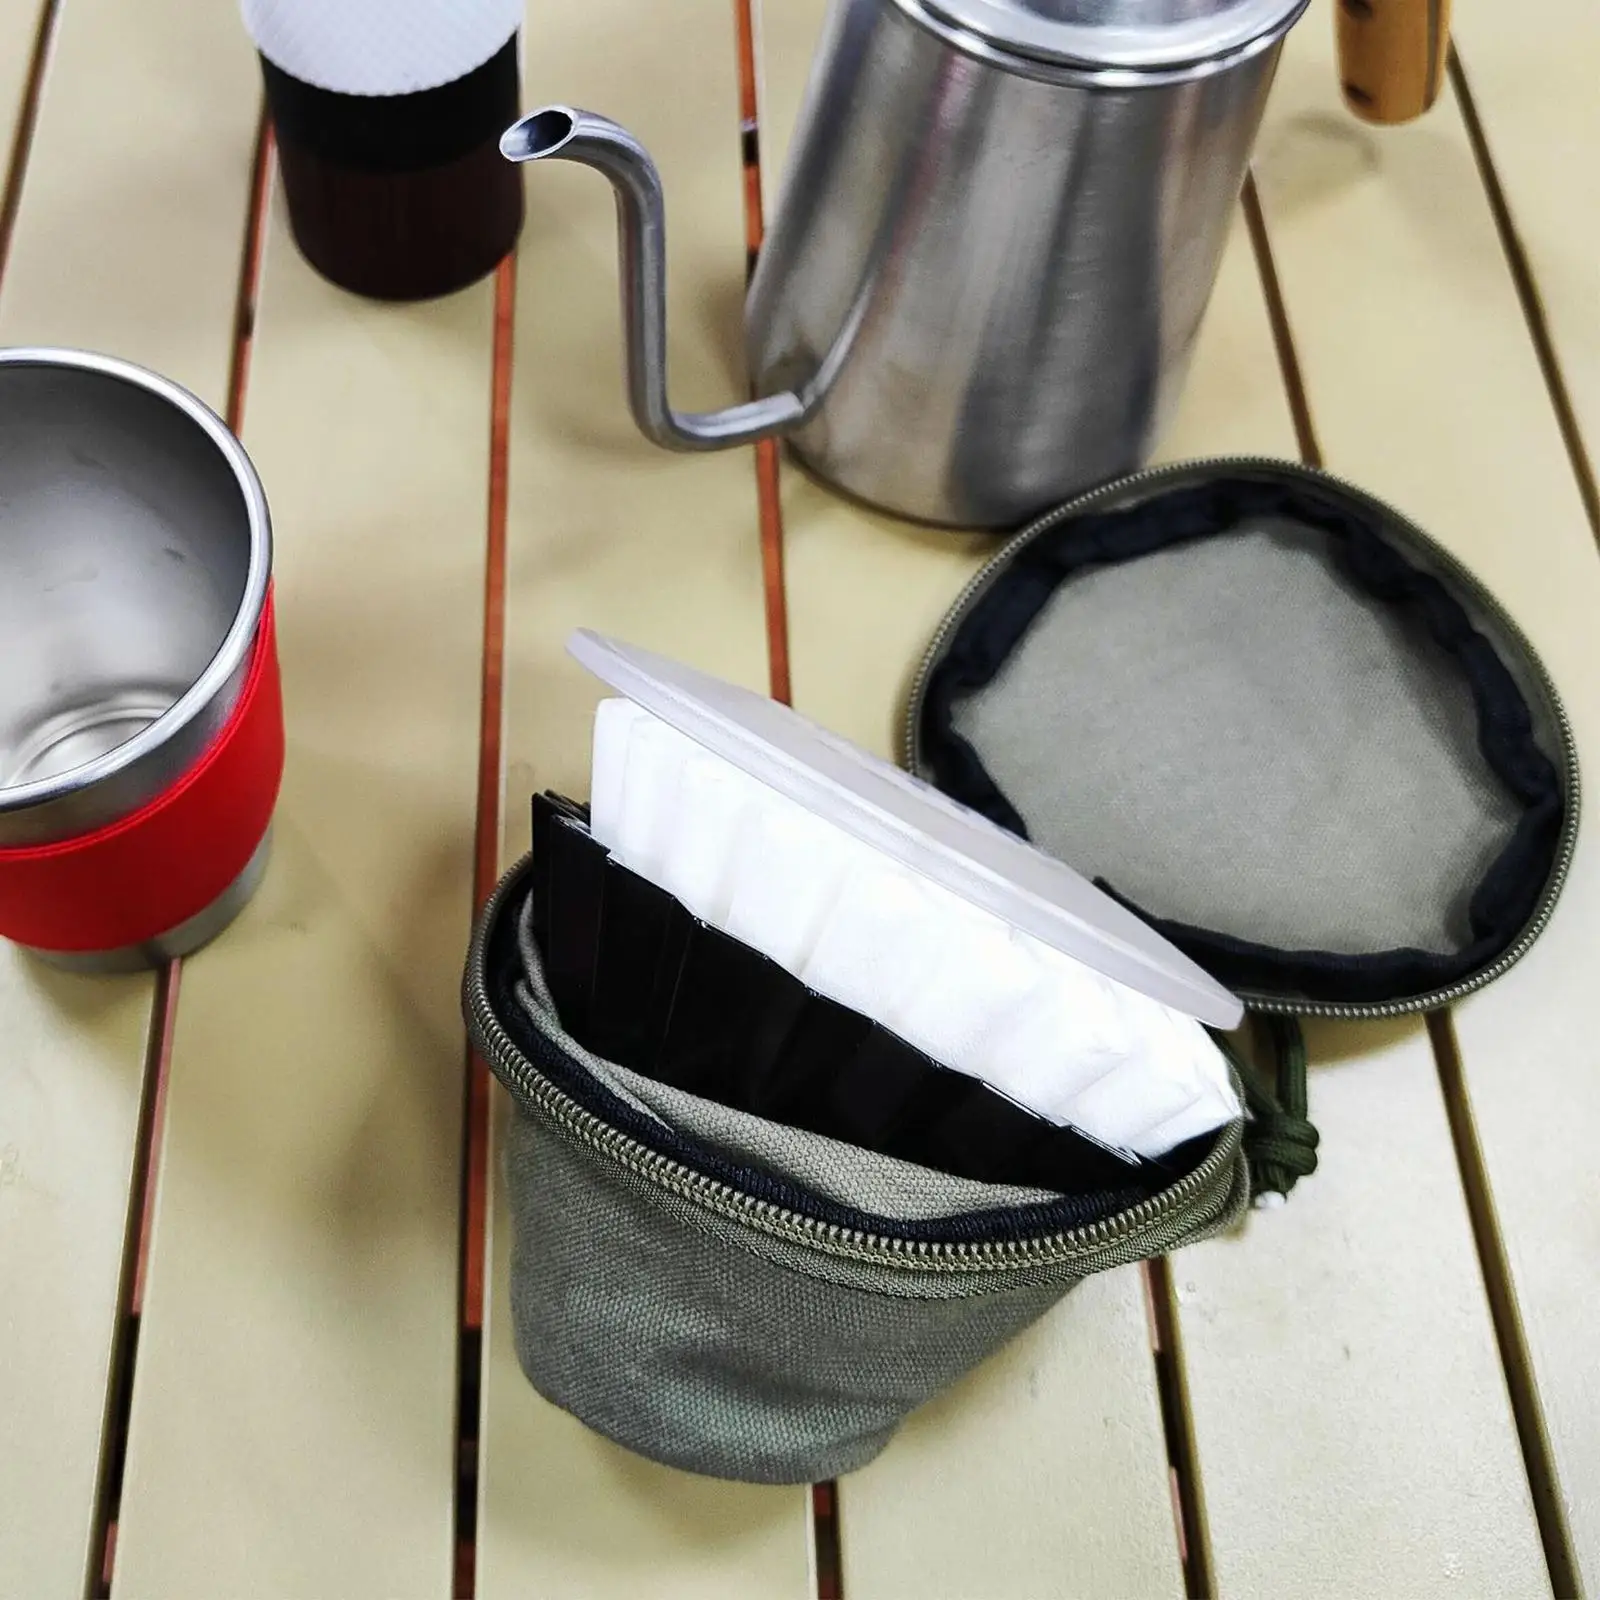 Coffee Filter Dispenser Pouch Basket Coffee Filter Holder for Hiking Indoor